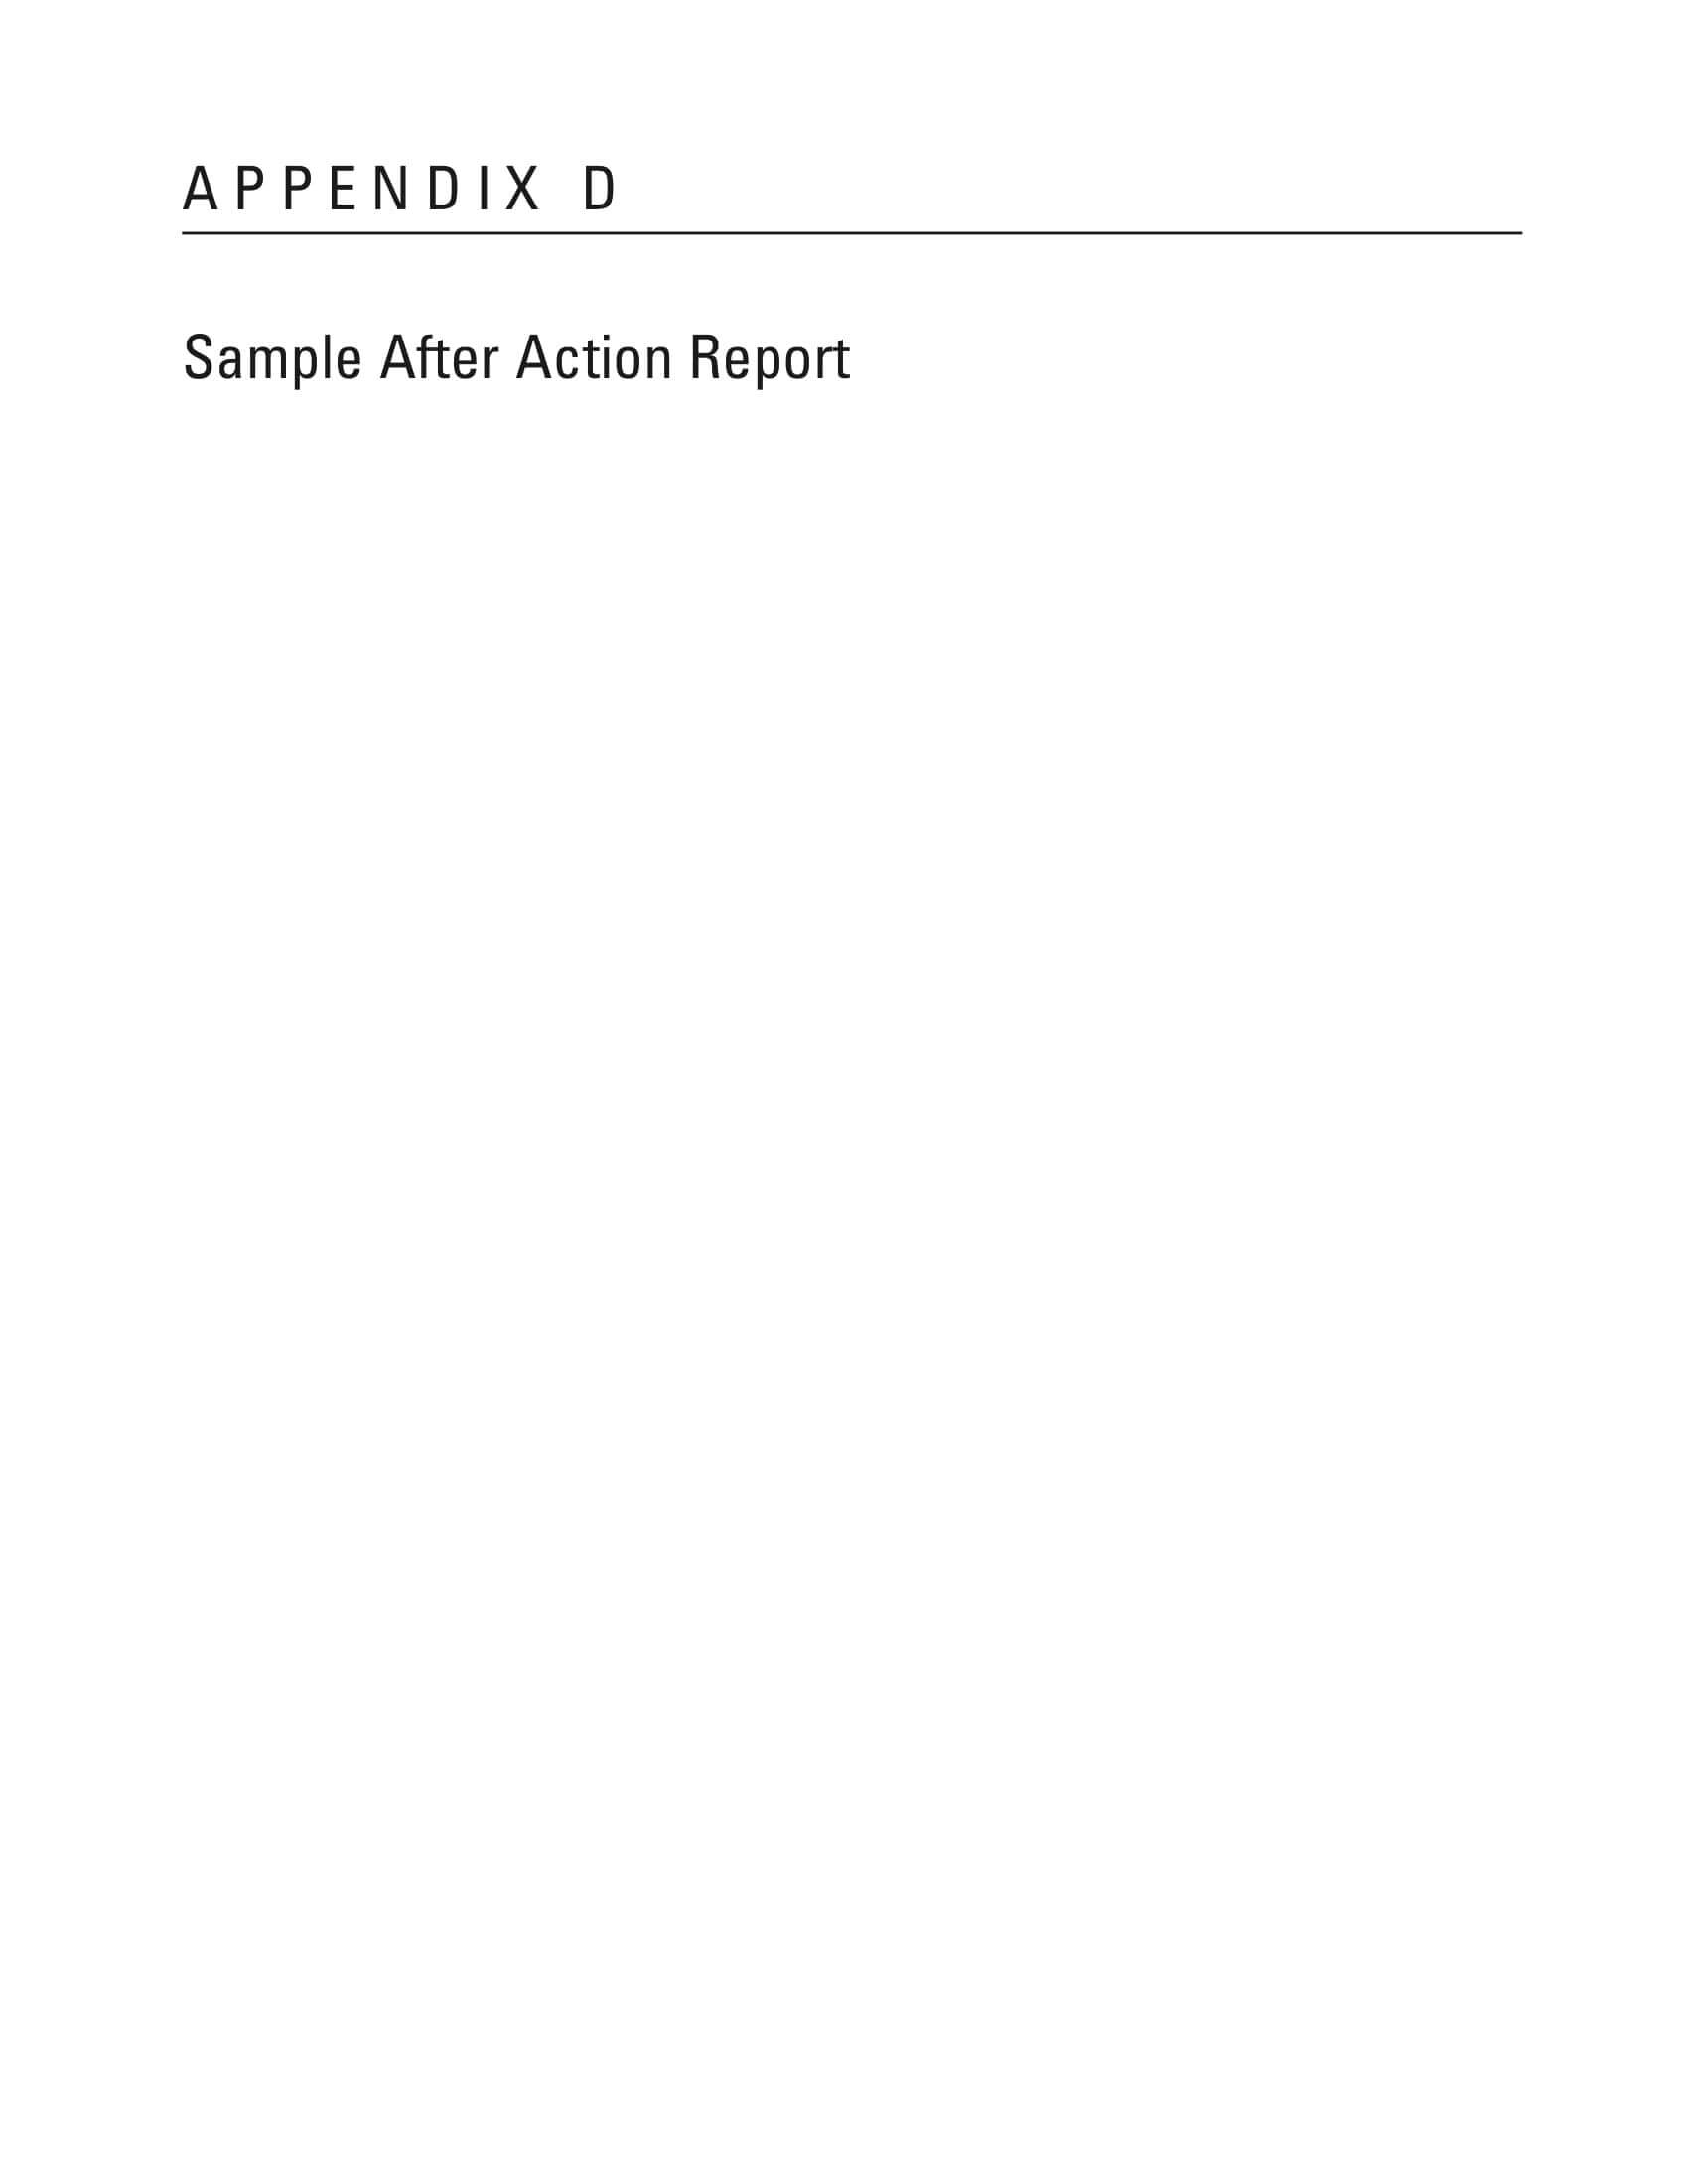 Rma Report Template Awesome Simple After Action Weekly Pertaining To Rma Report Template